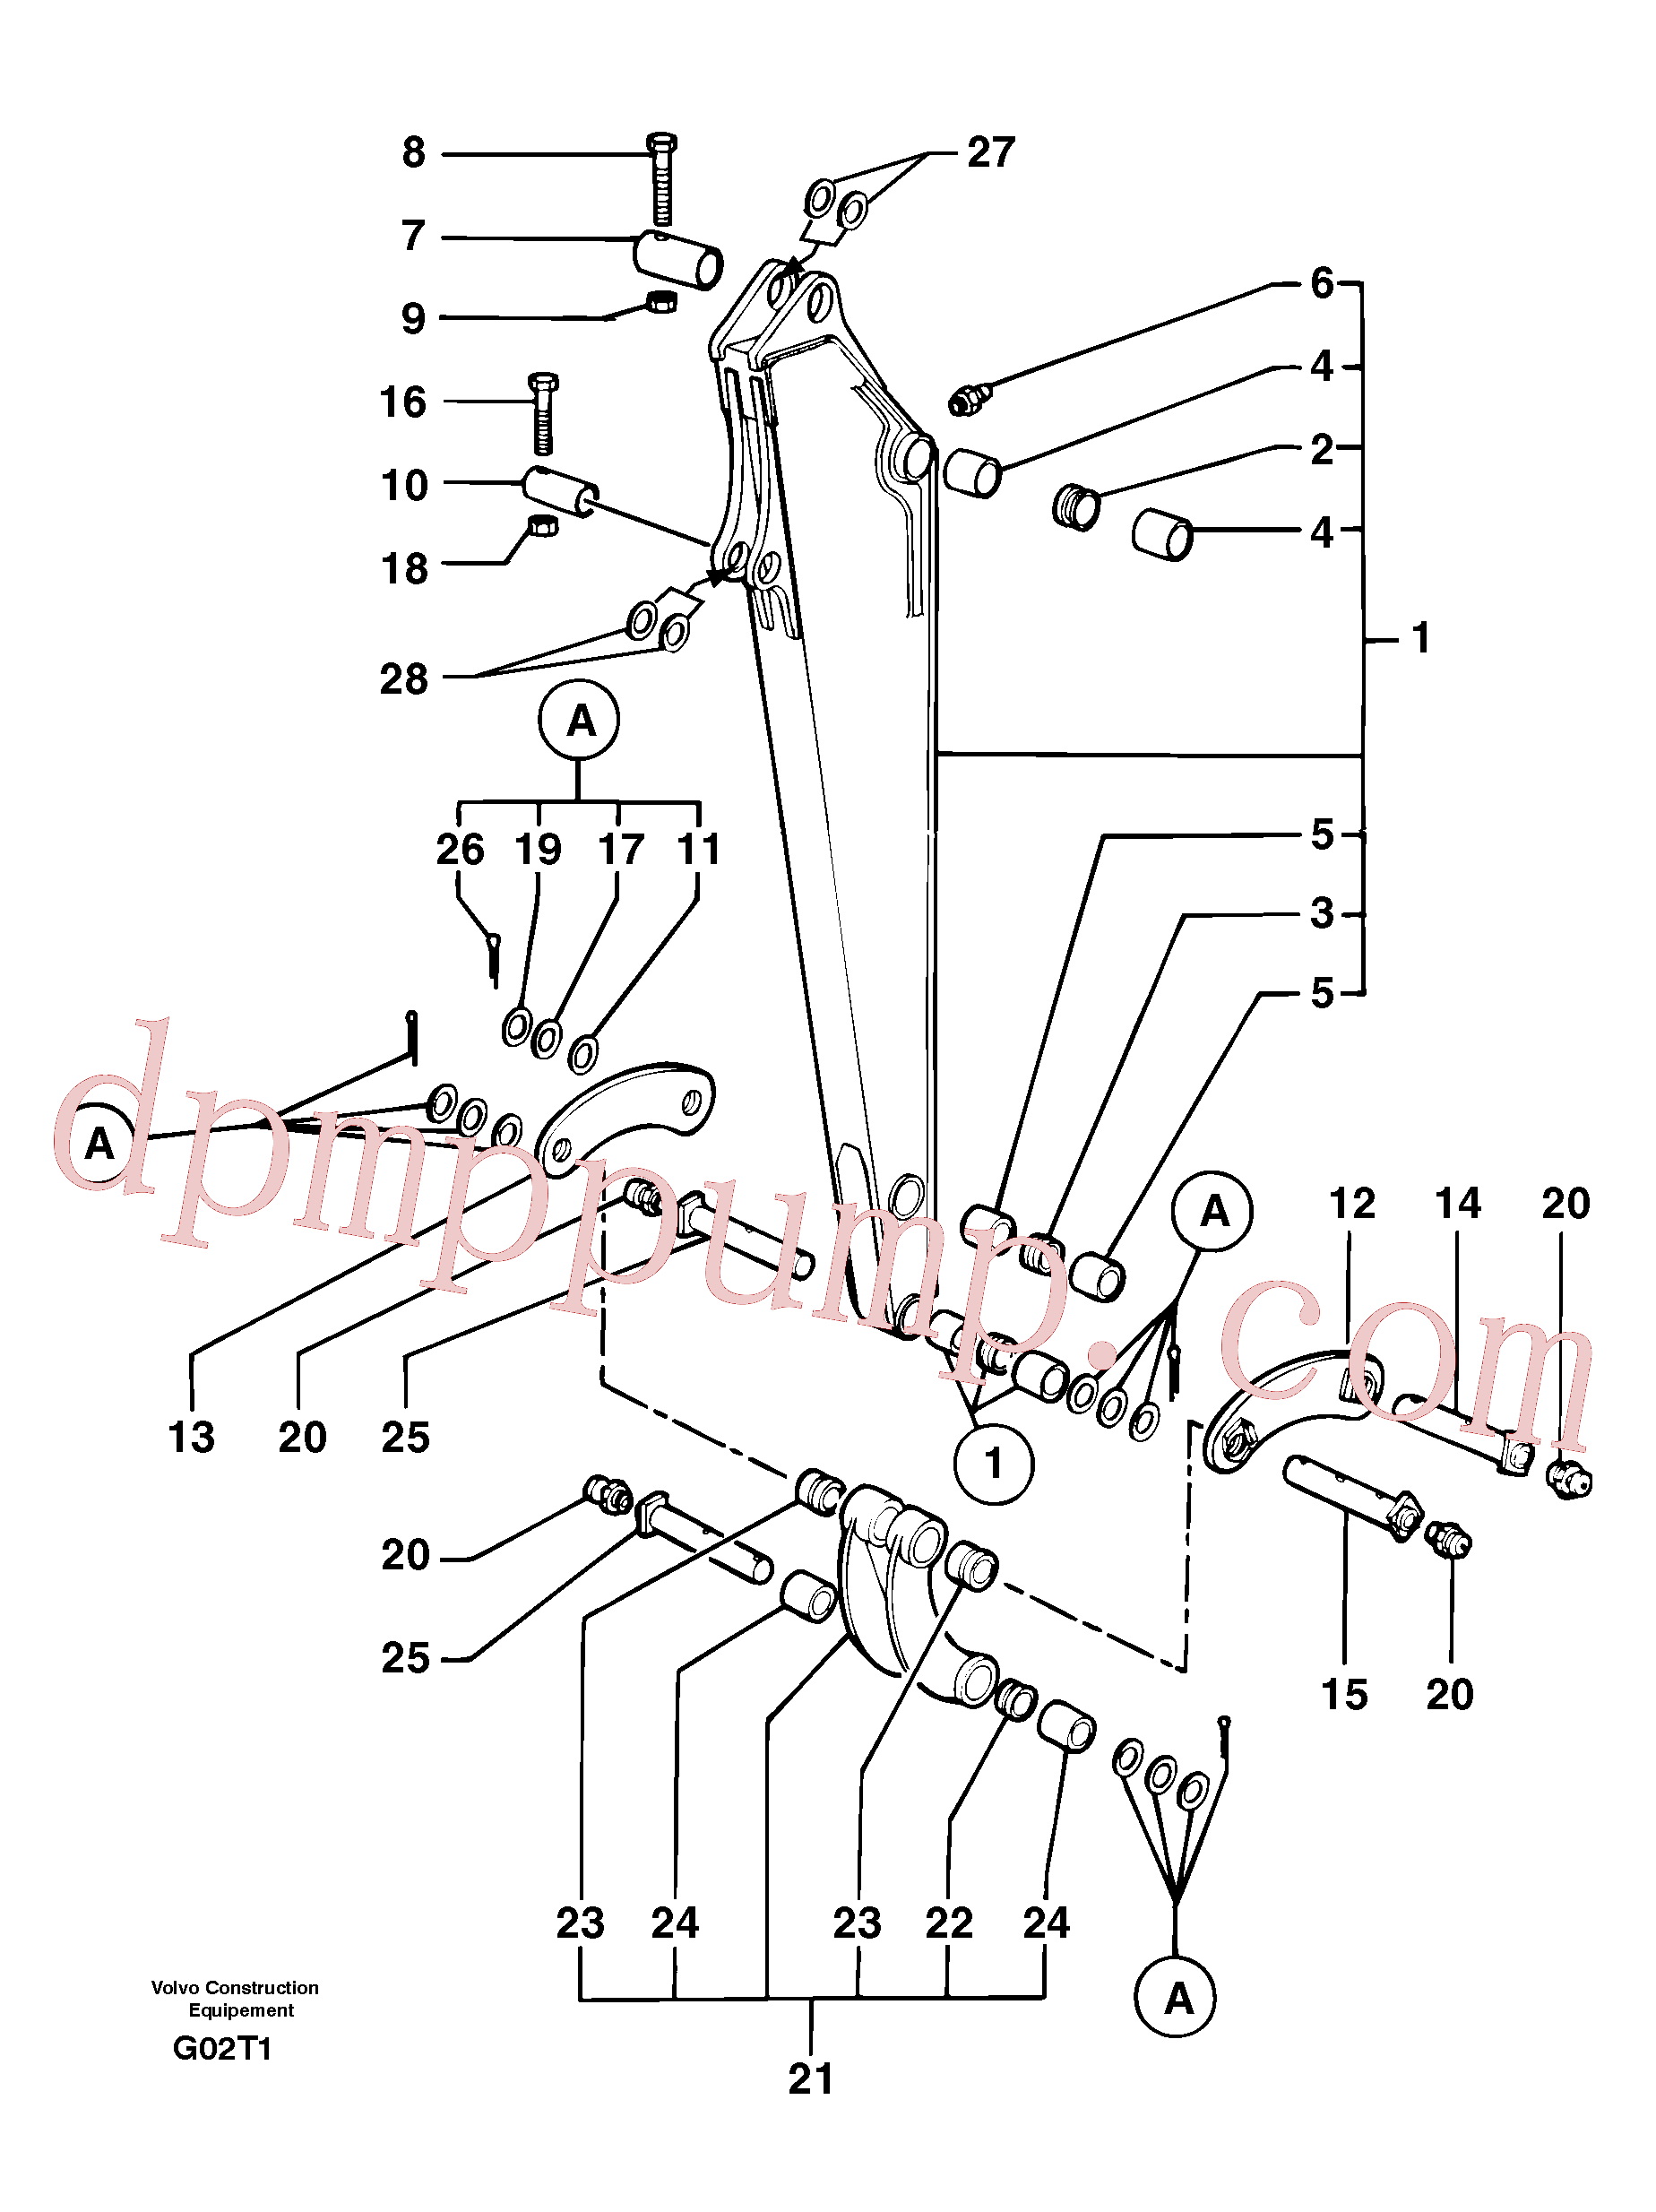 PJ5460028 for Volvo Dipper arm(G02T1 assembly)